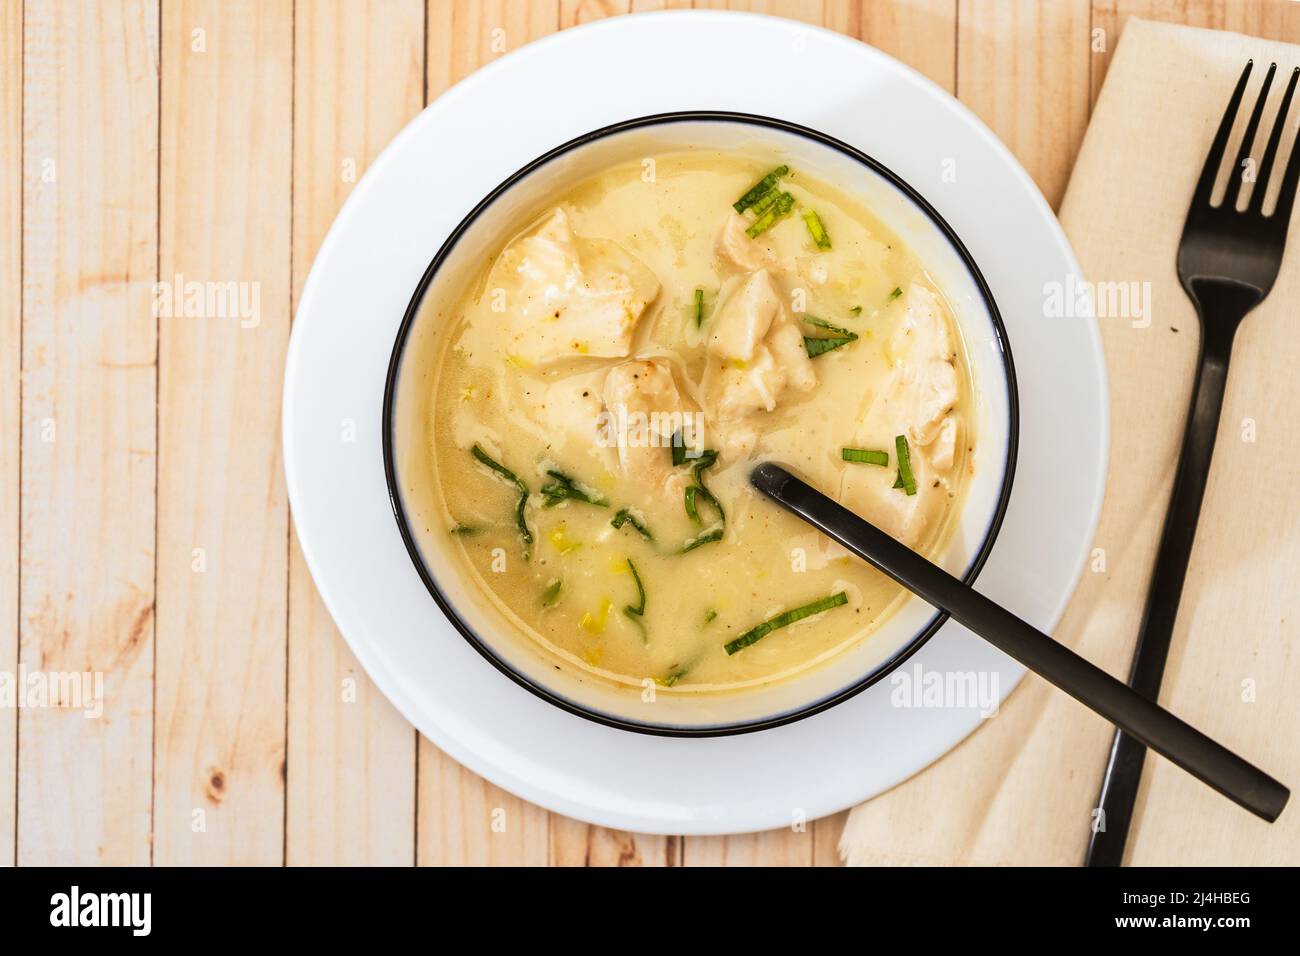 Modern bowl with a traditional homemade cream of poultry soup with chicken pieces, parsley and cream on a rustic or country style wooden table. Natura Stock Photo